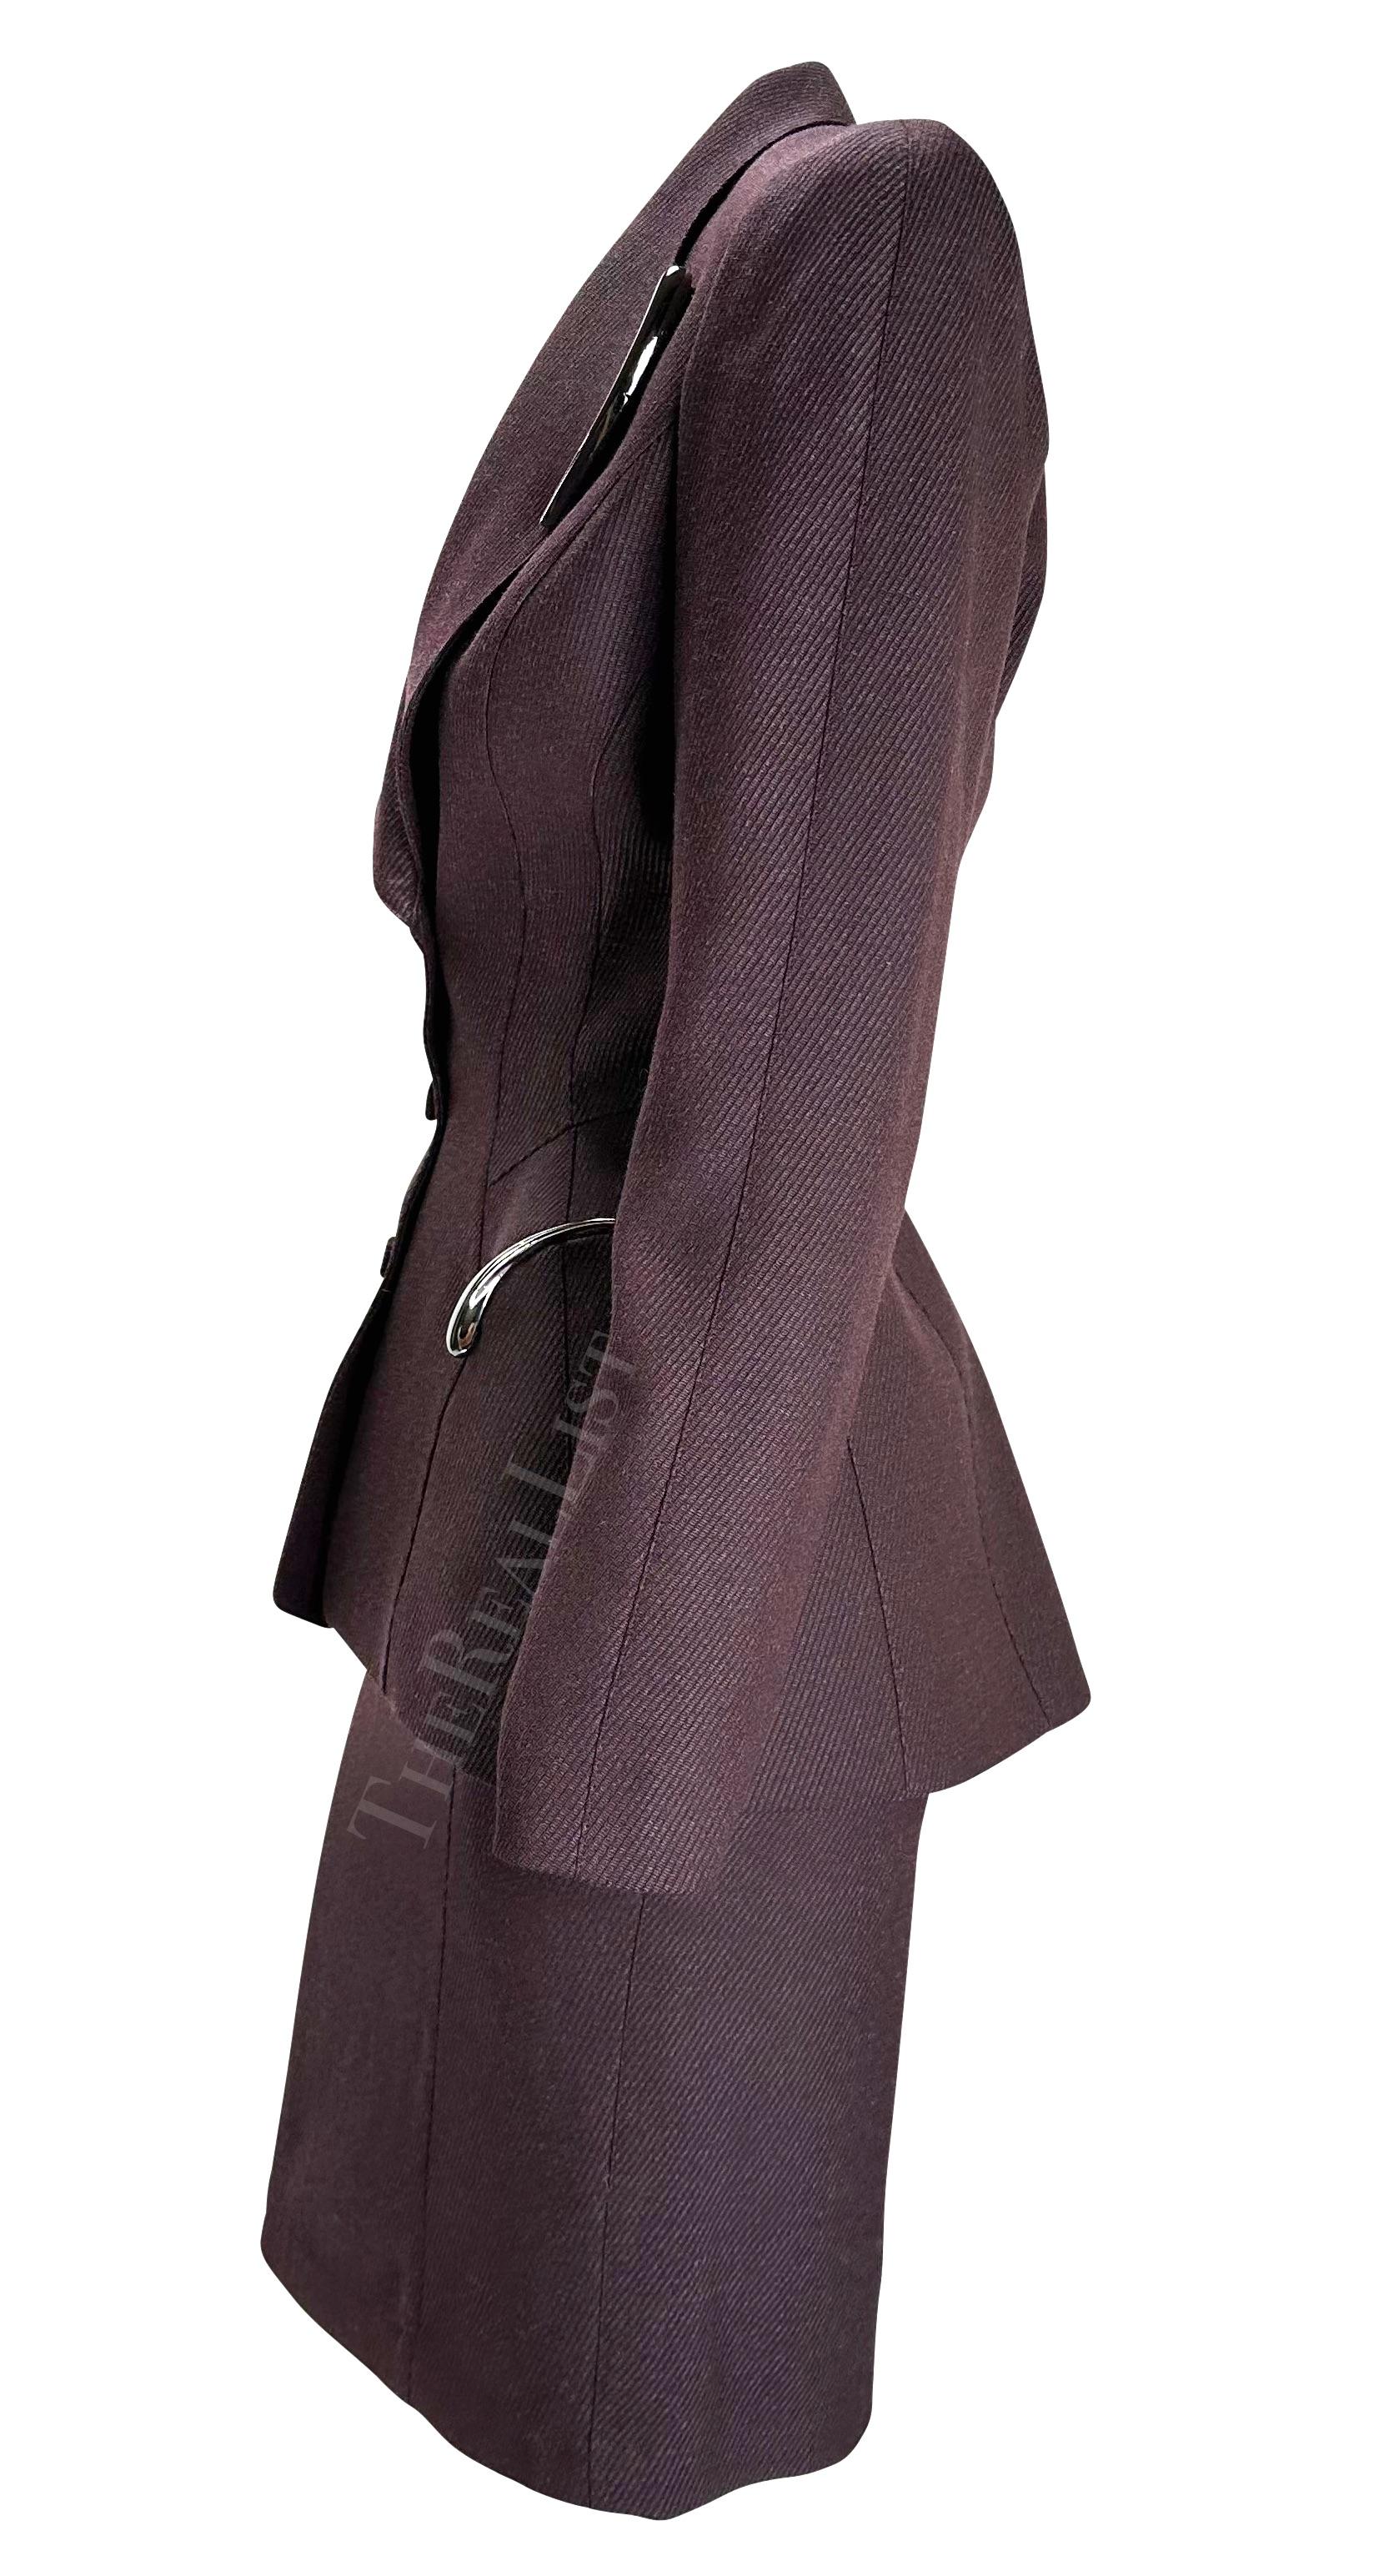 F/W 1998 Thierry Mugler Runway Burgundy Sculptural Metal Appliqué Skirt Suit In Excellent Condition For Sale In West Hollywood, CA